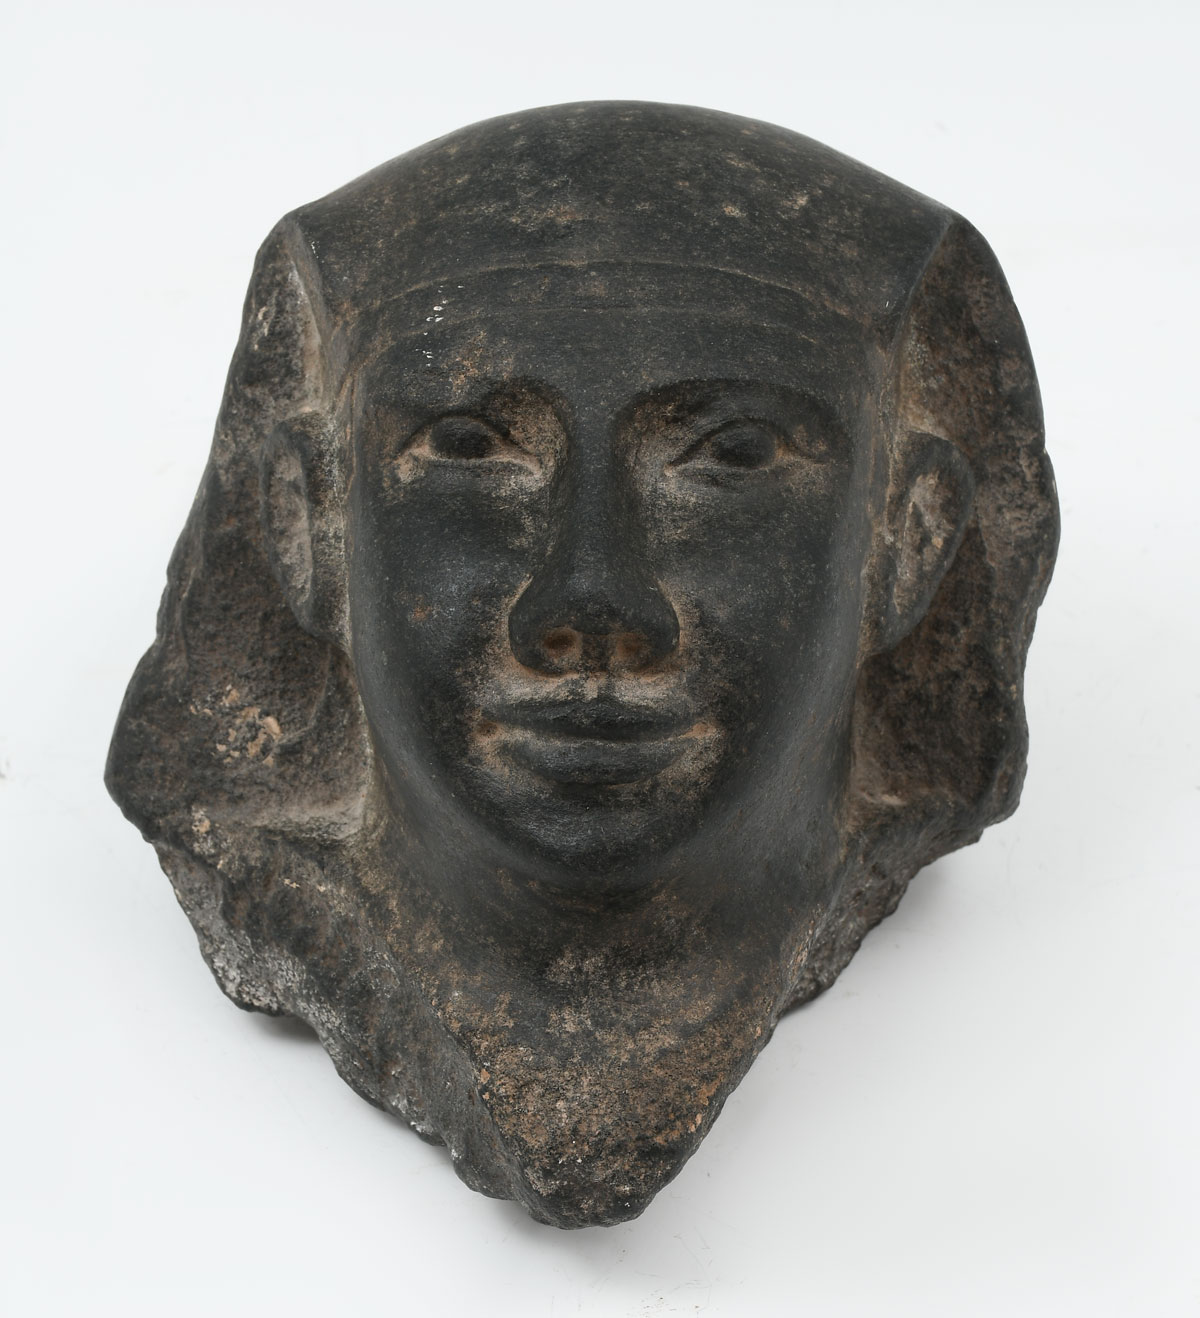 ANCIENT EGYPTIAN STONE HEAD CARVING: